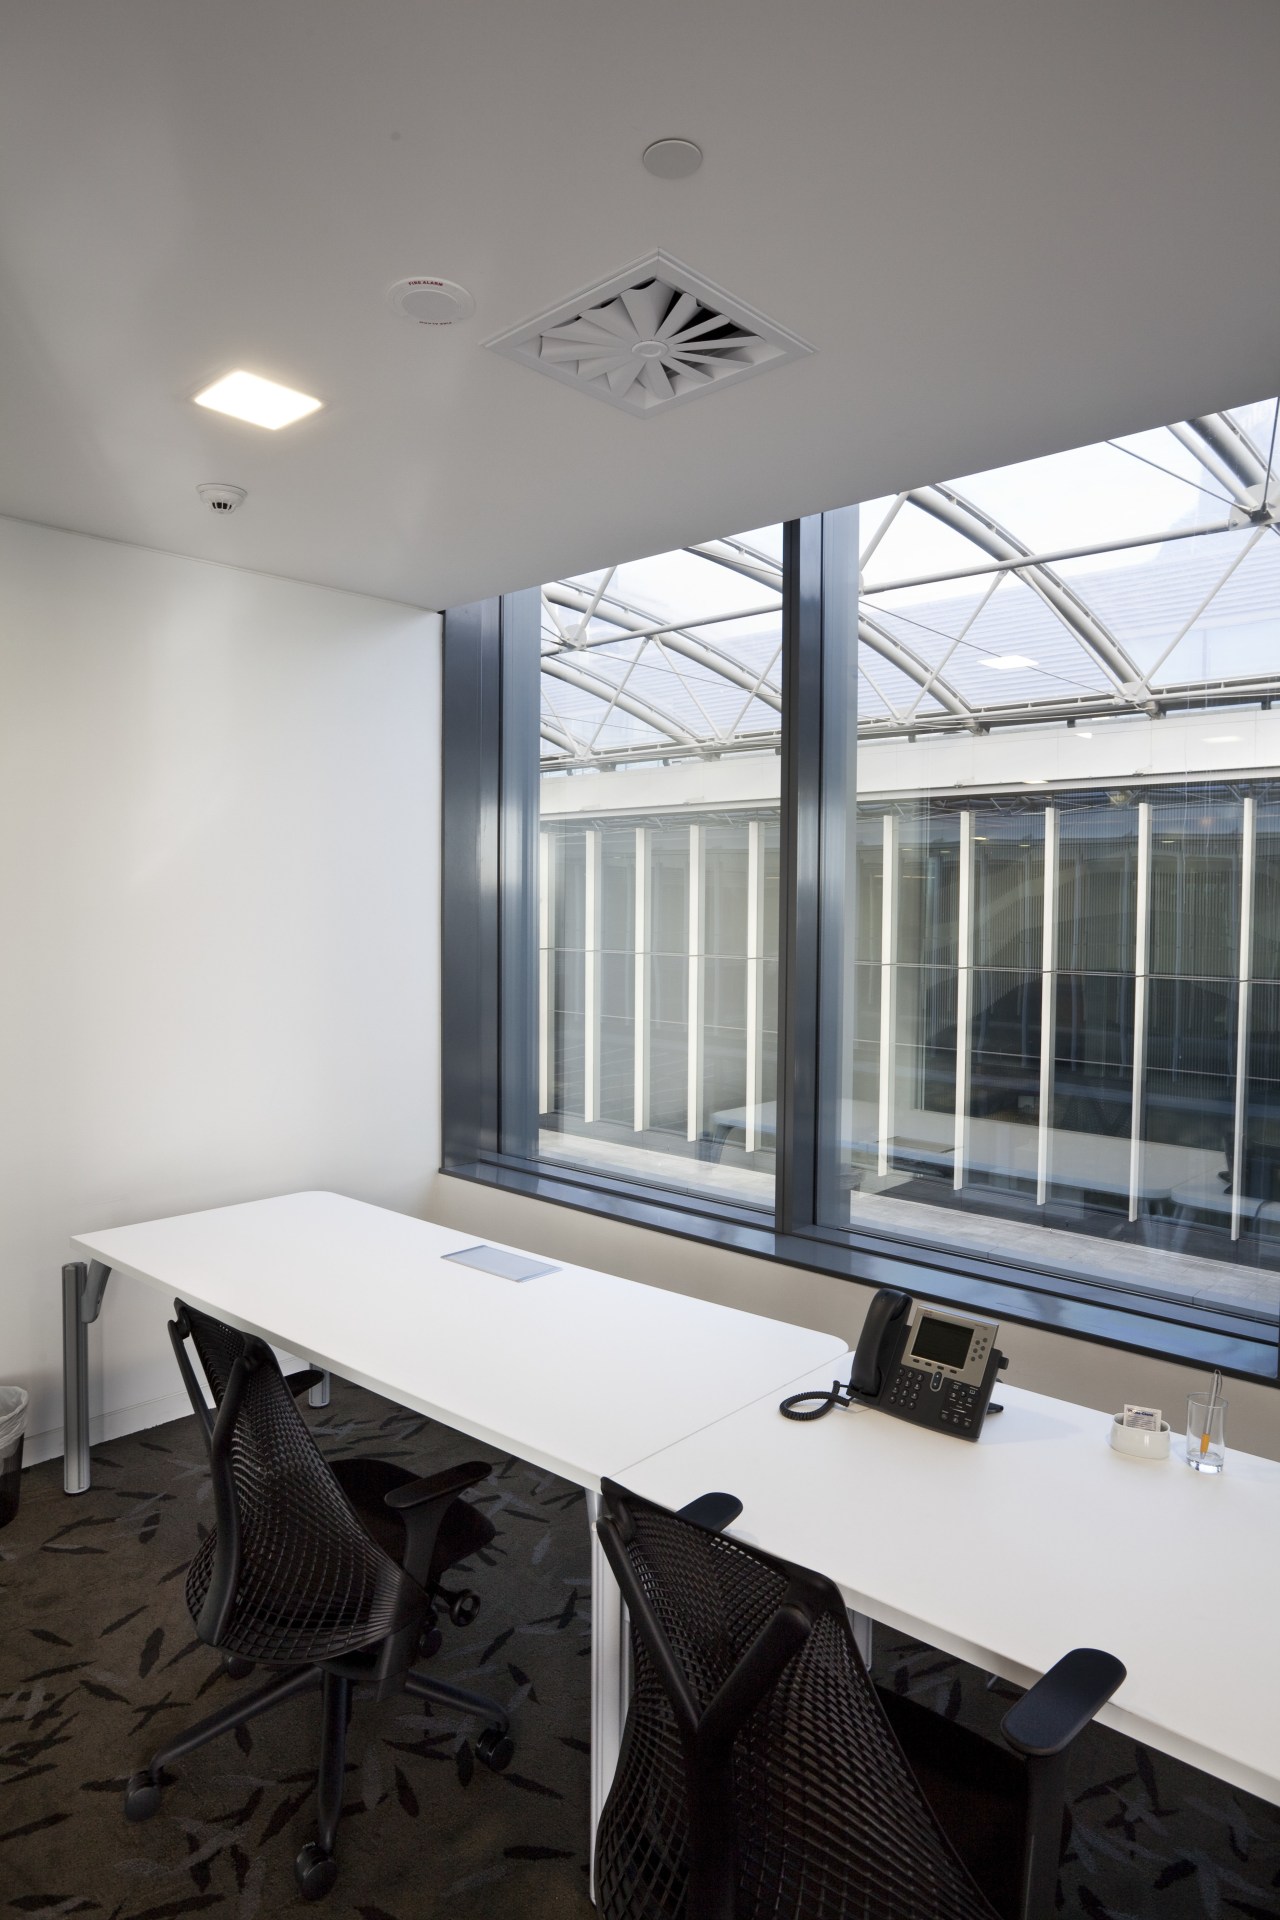 View of Britomart East project, for which Norman architecture, ceiling, daylighting, glass, house, interior design, office, table, window, gray, white